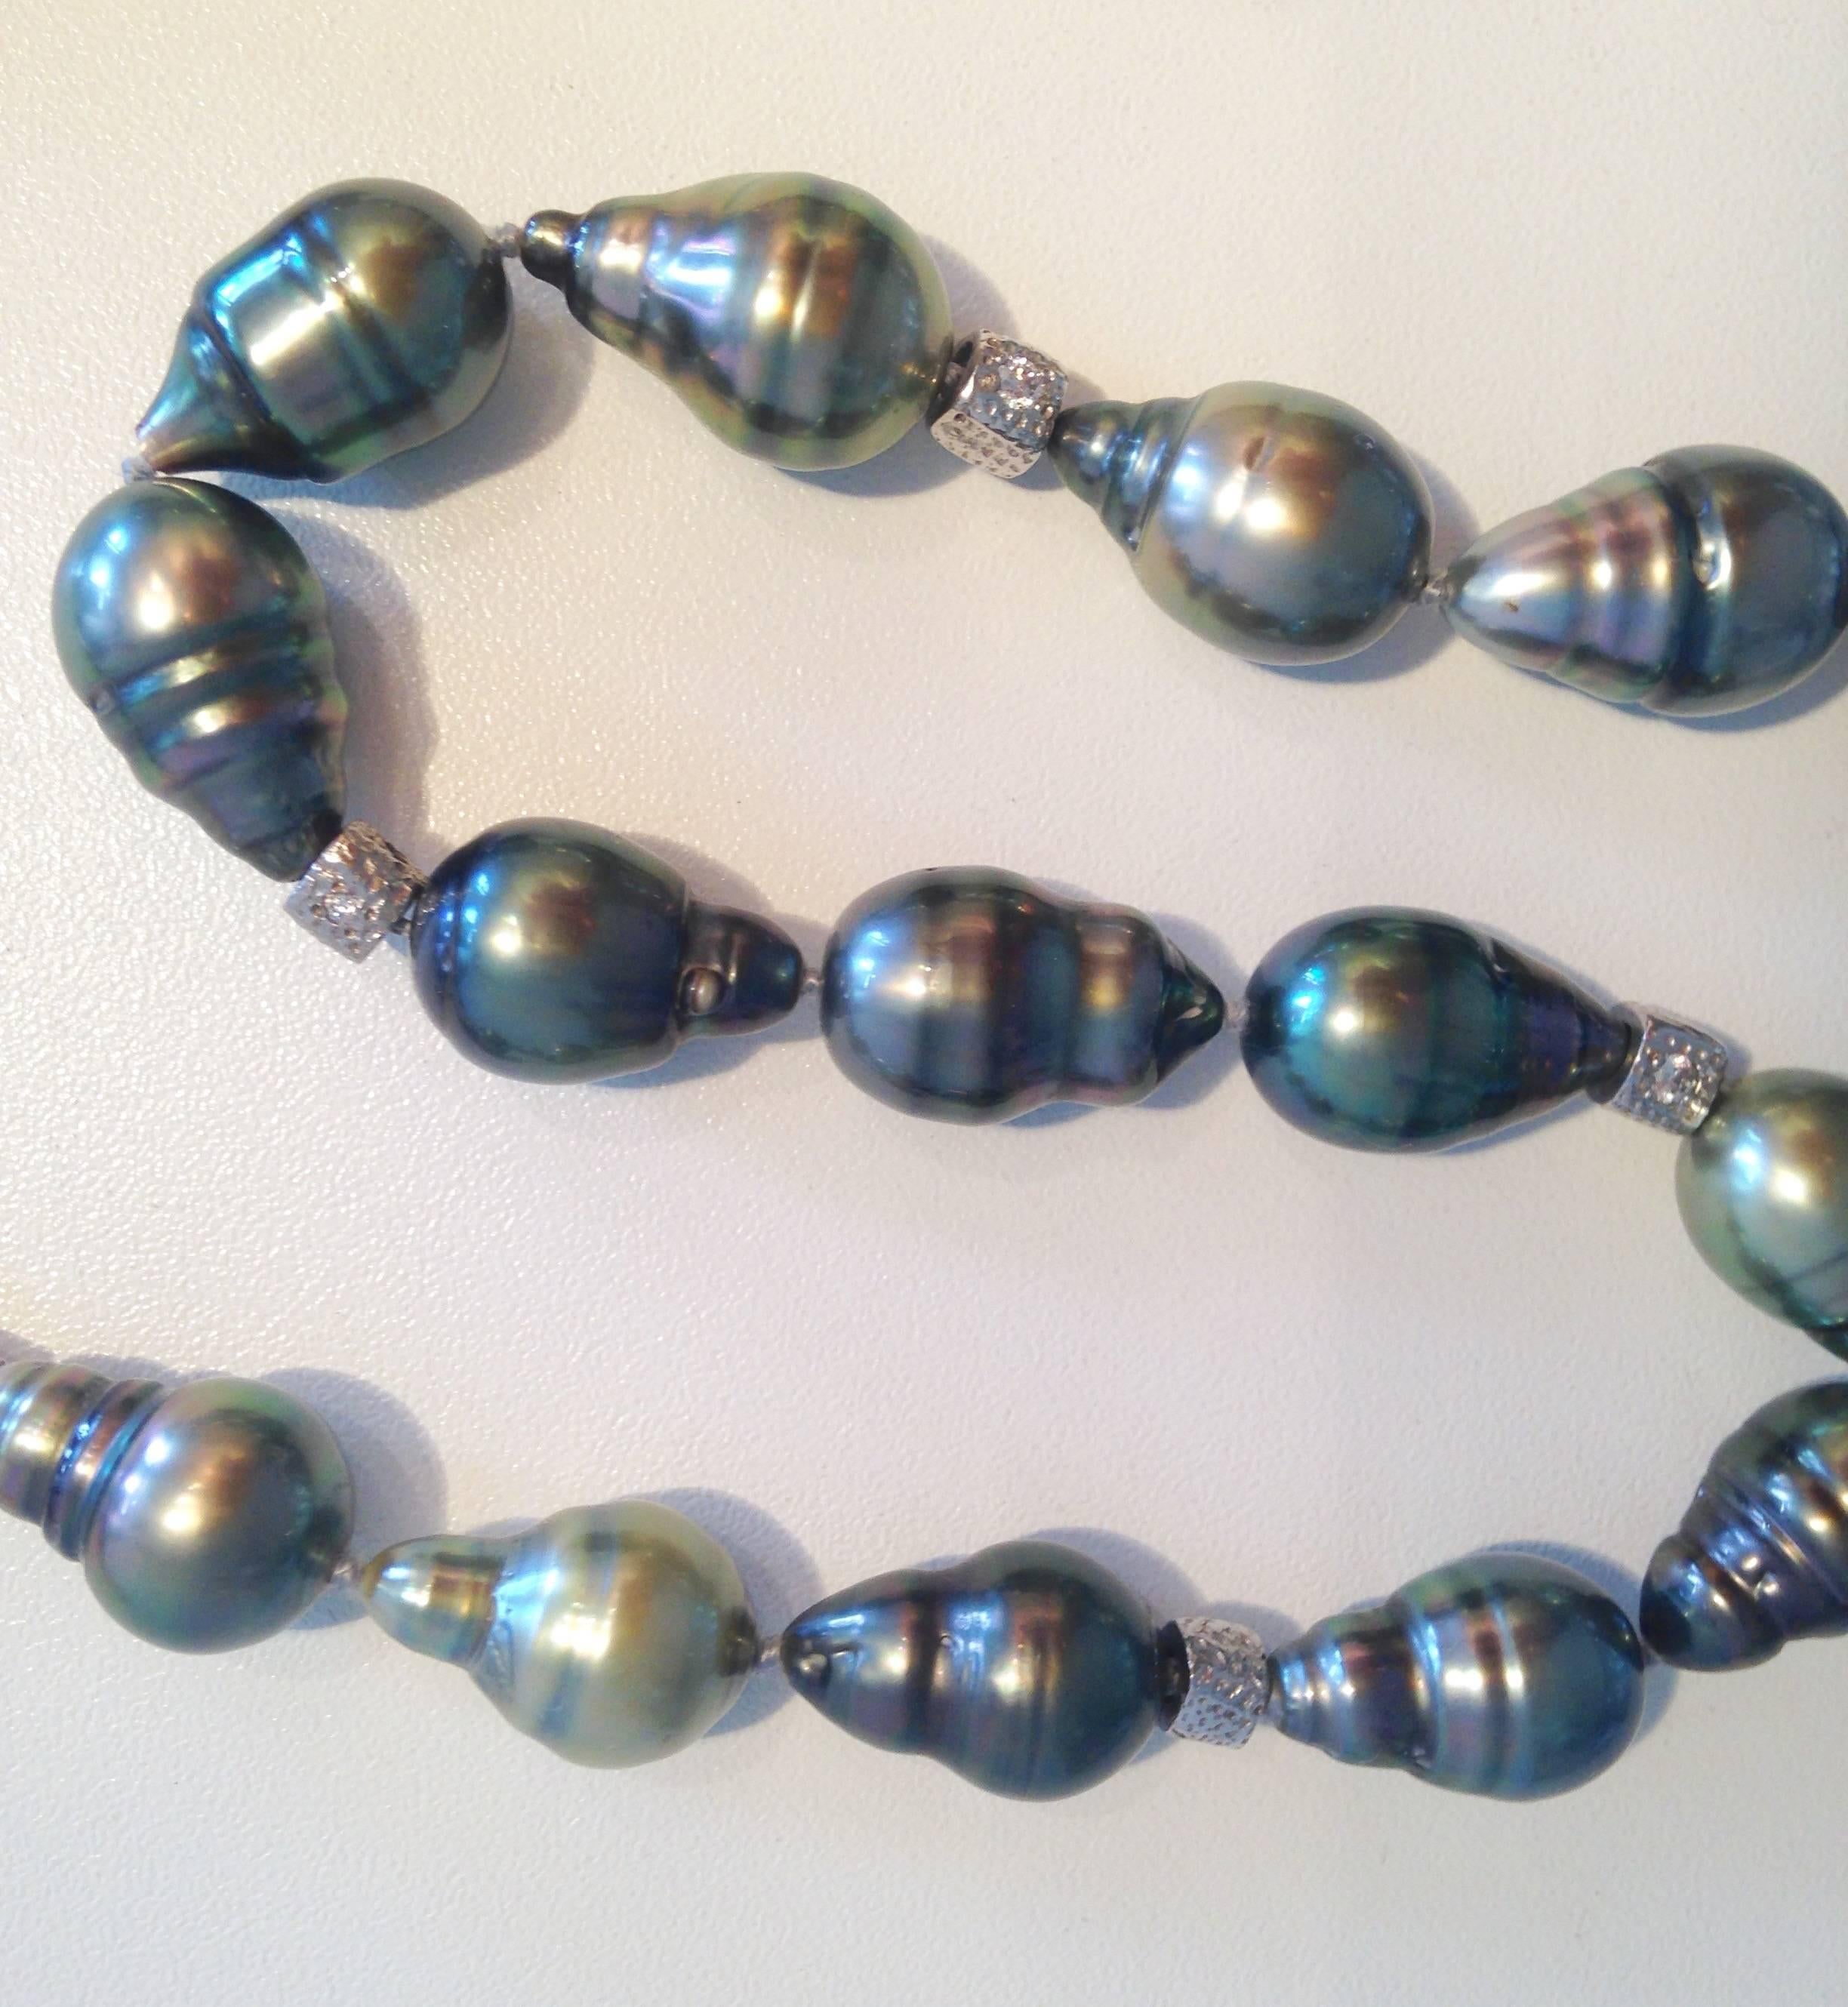 Roaring Twenties Black Tahitian Pearl Necklace In Excellent Condition For Sale In Nantucket, MA